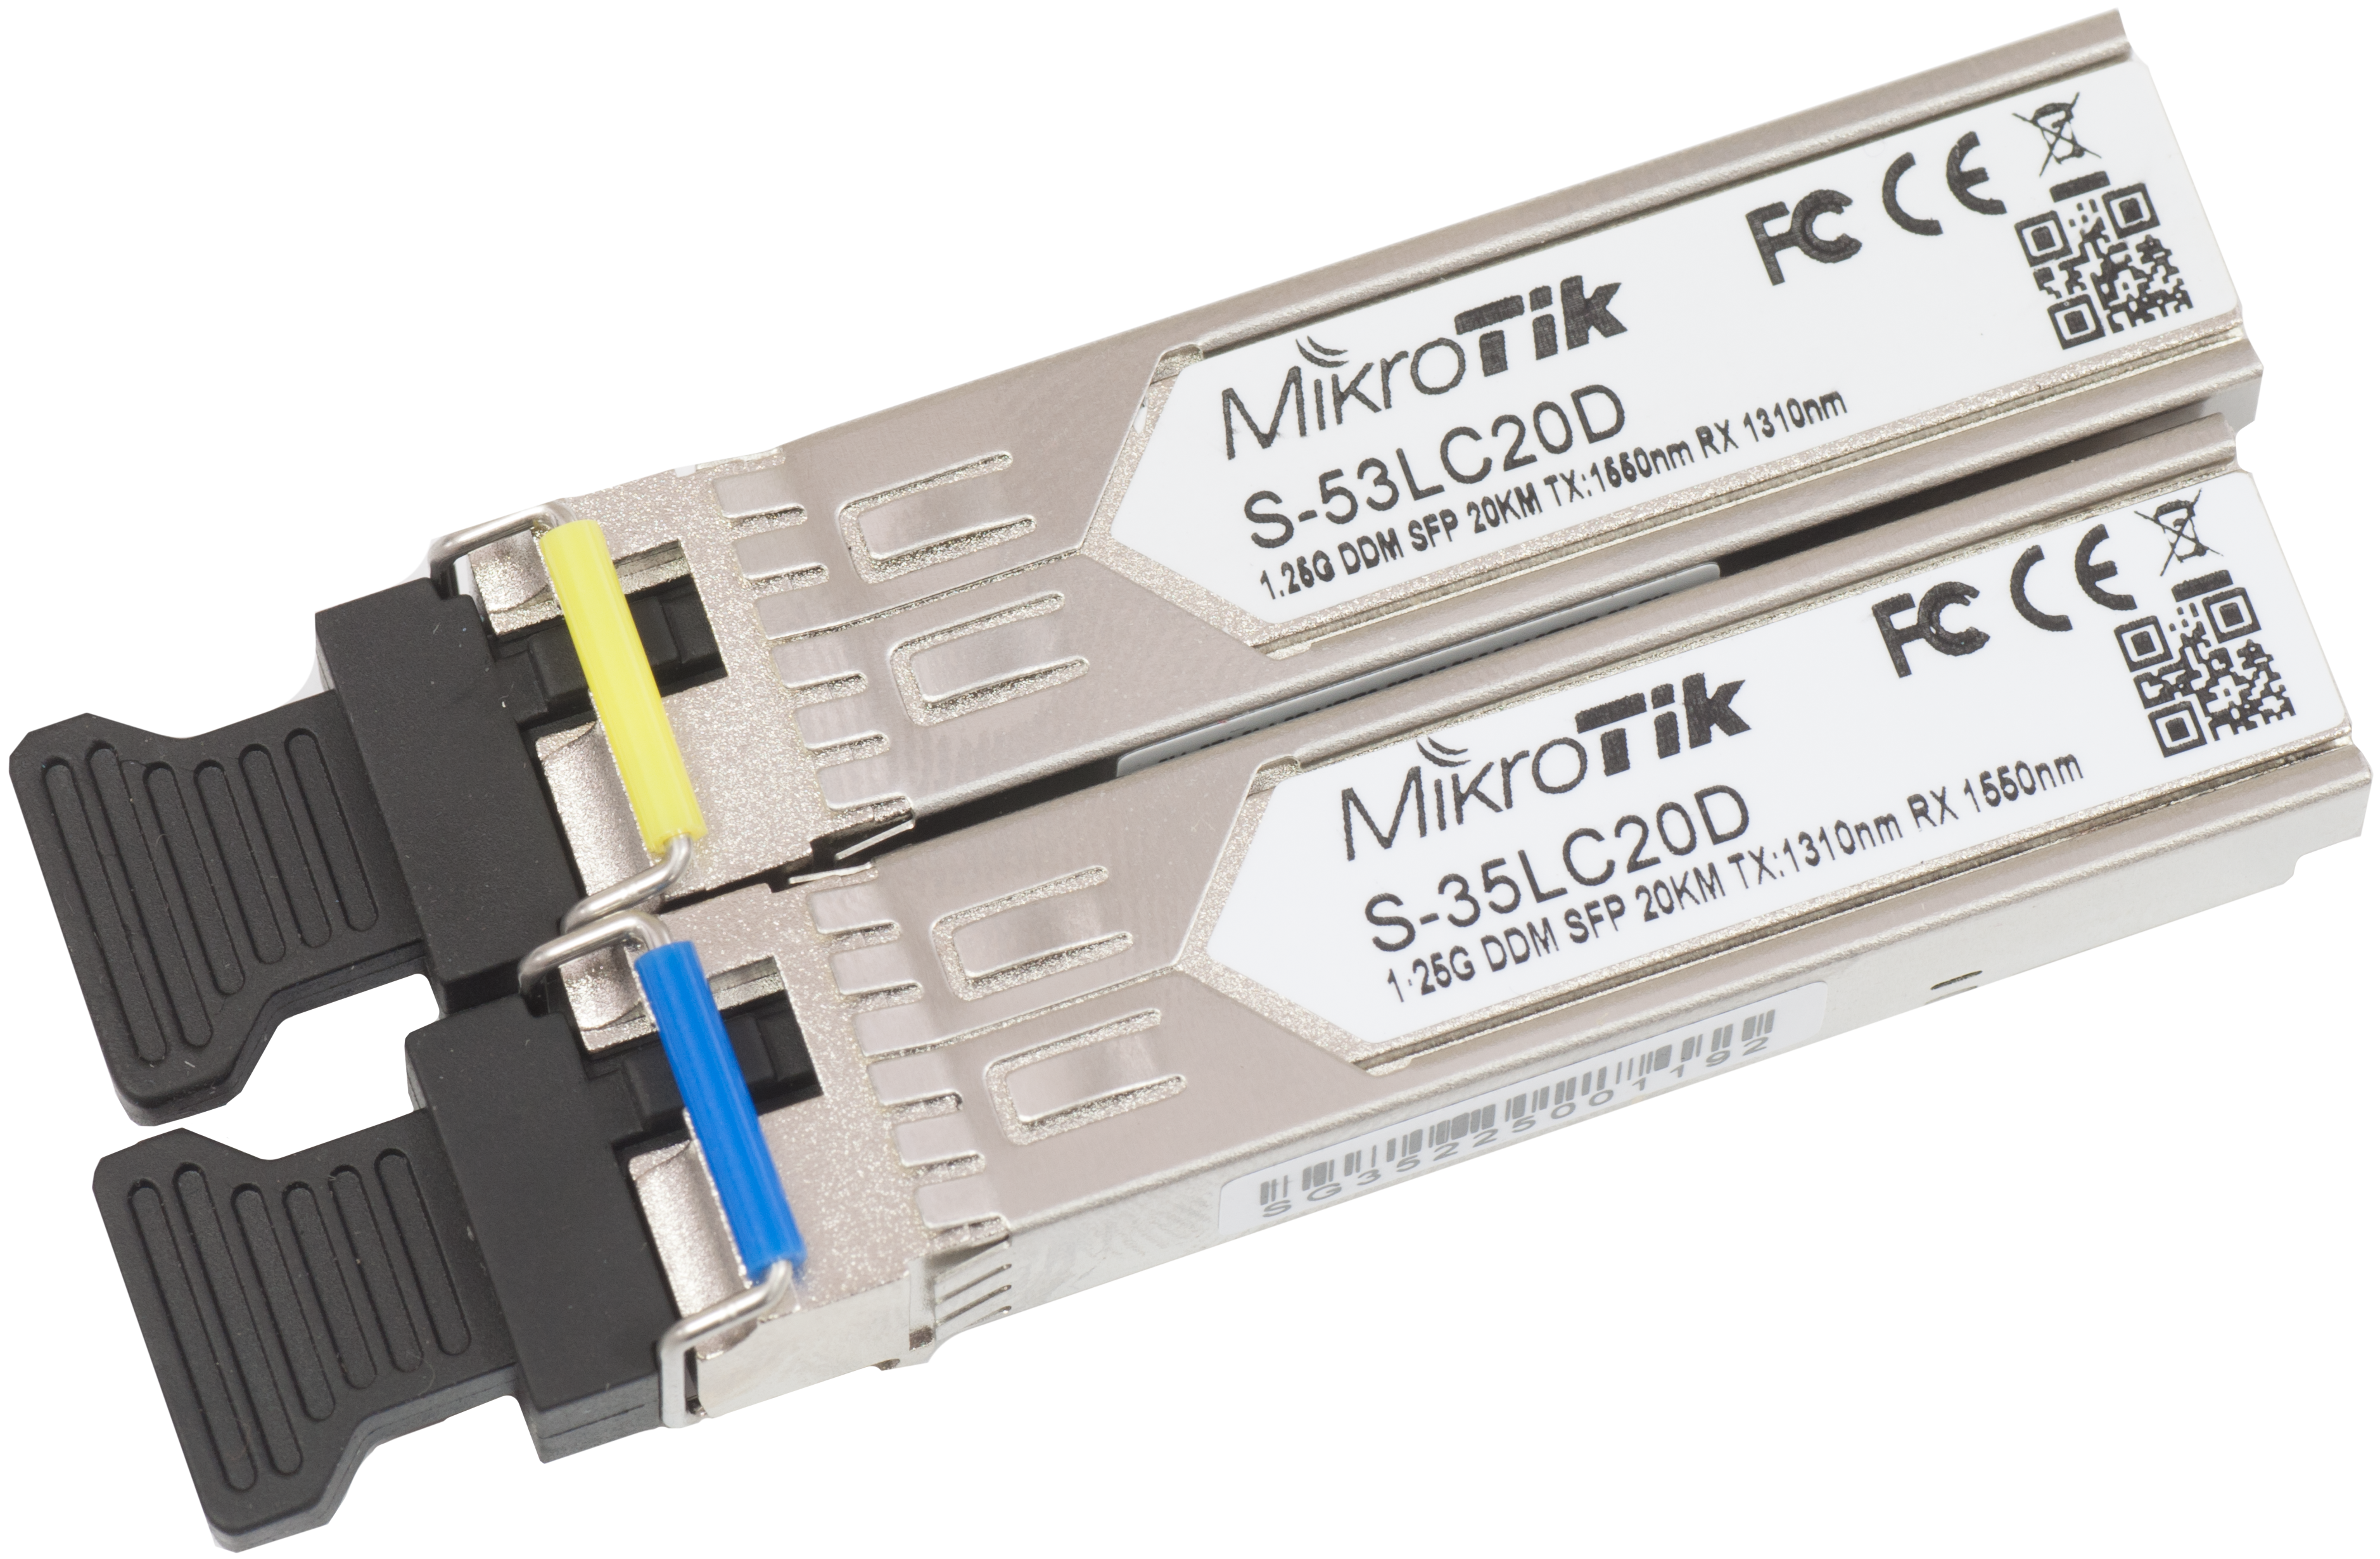 MikroTik Routers and Wireless - Products: S-3553LC20D